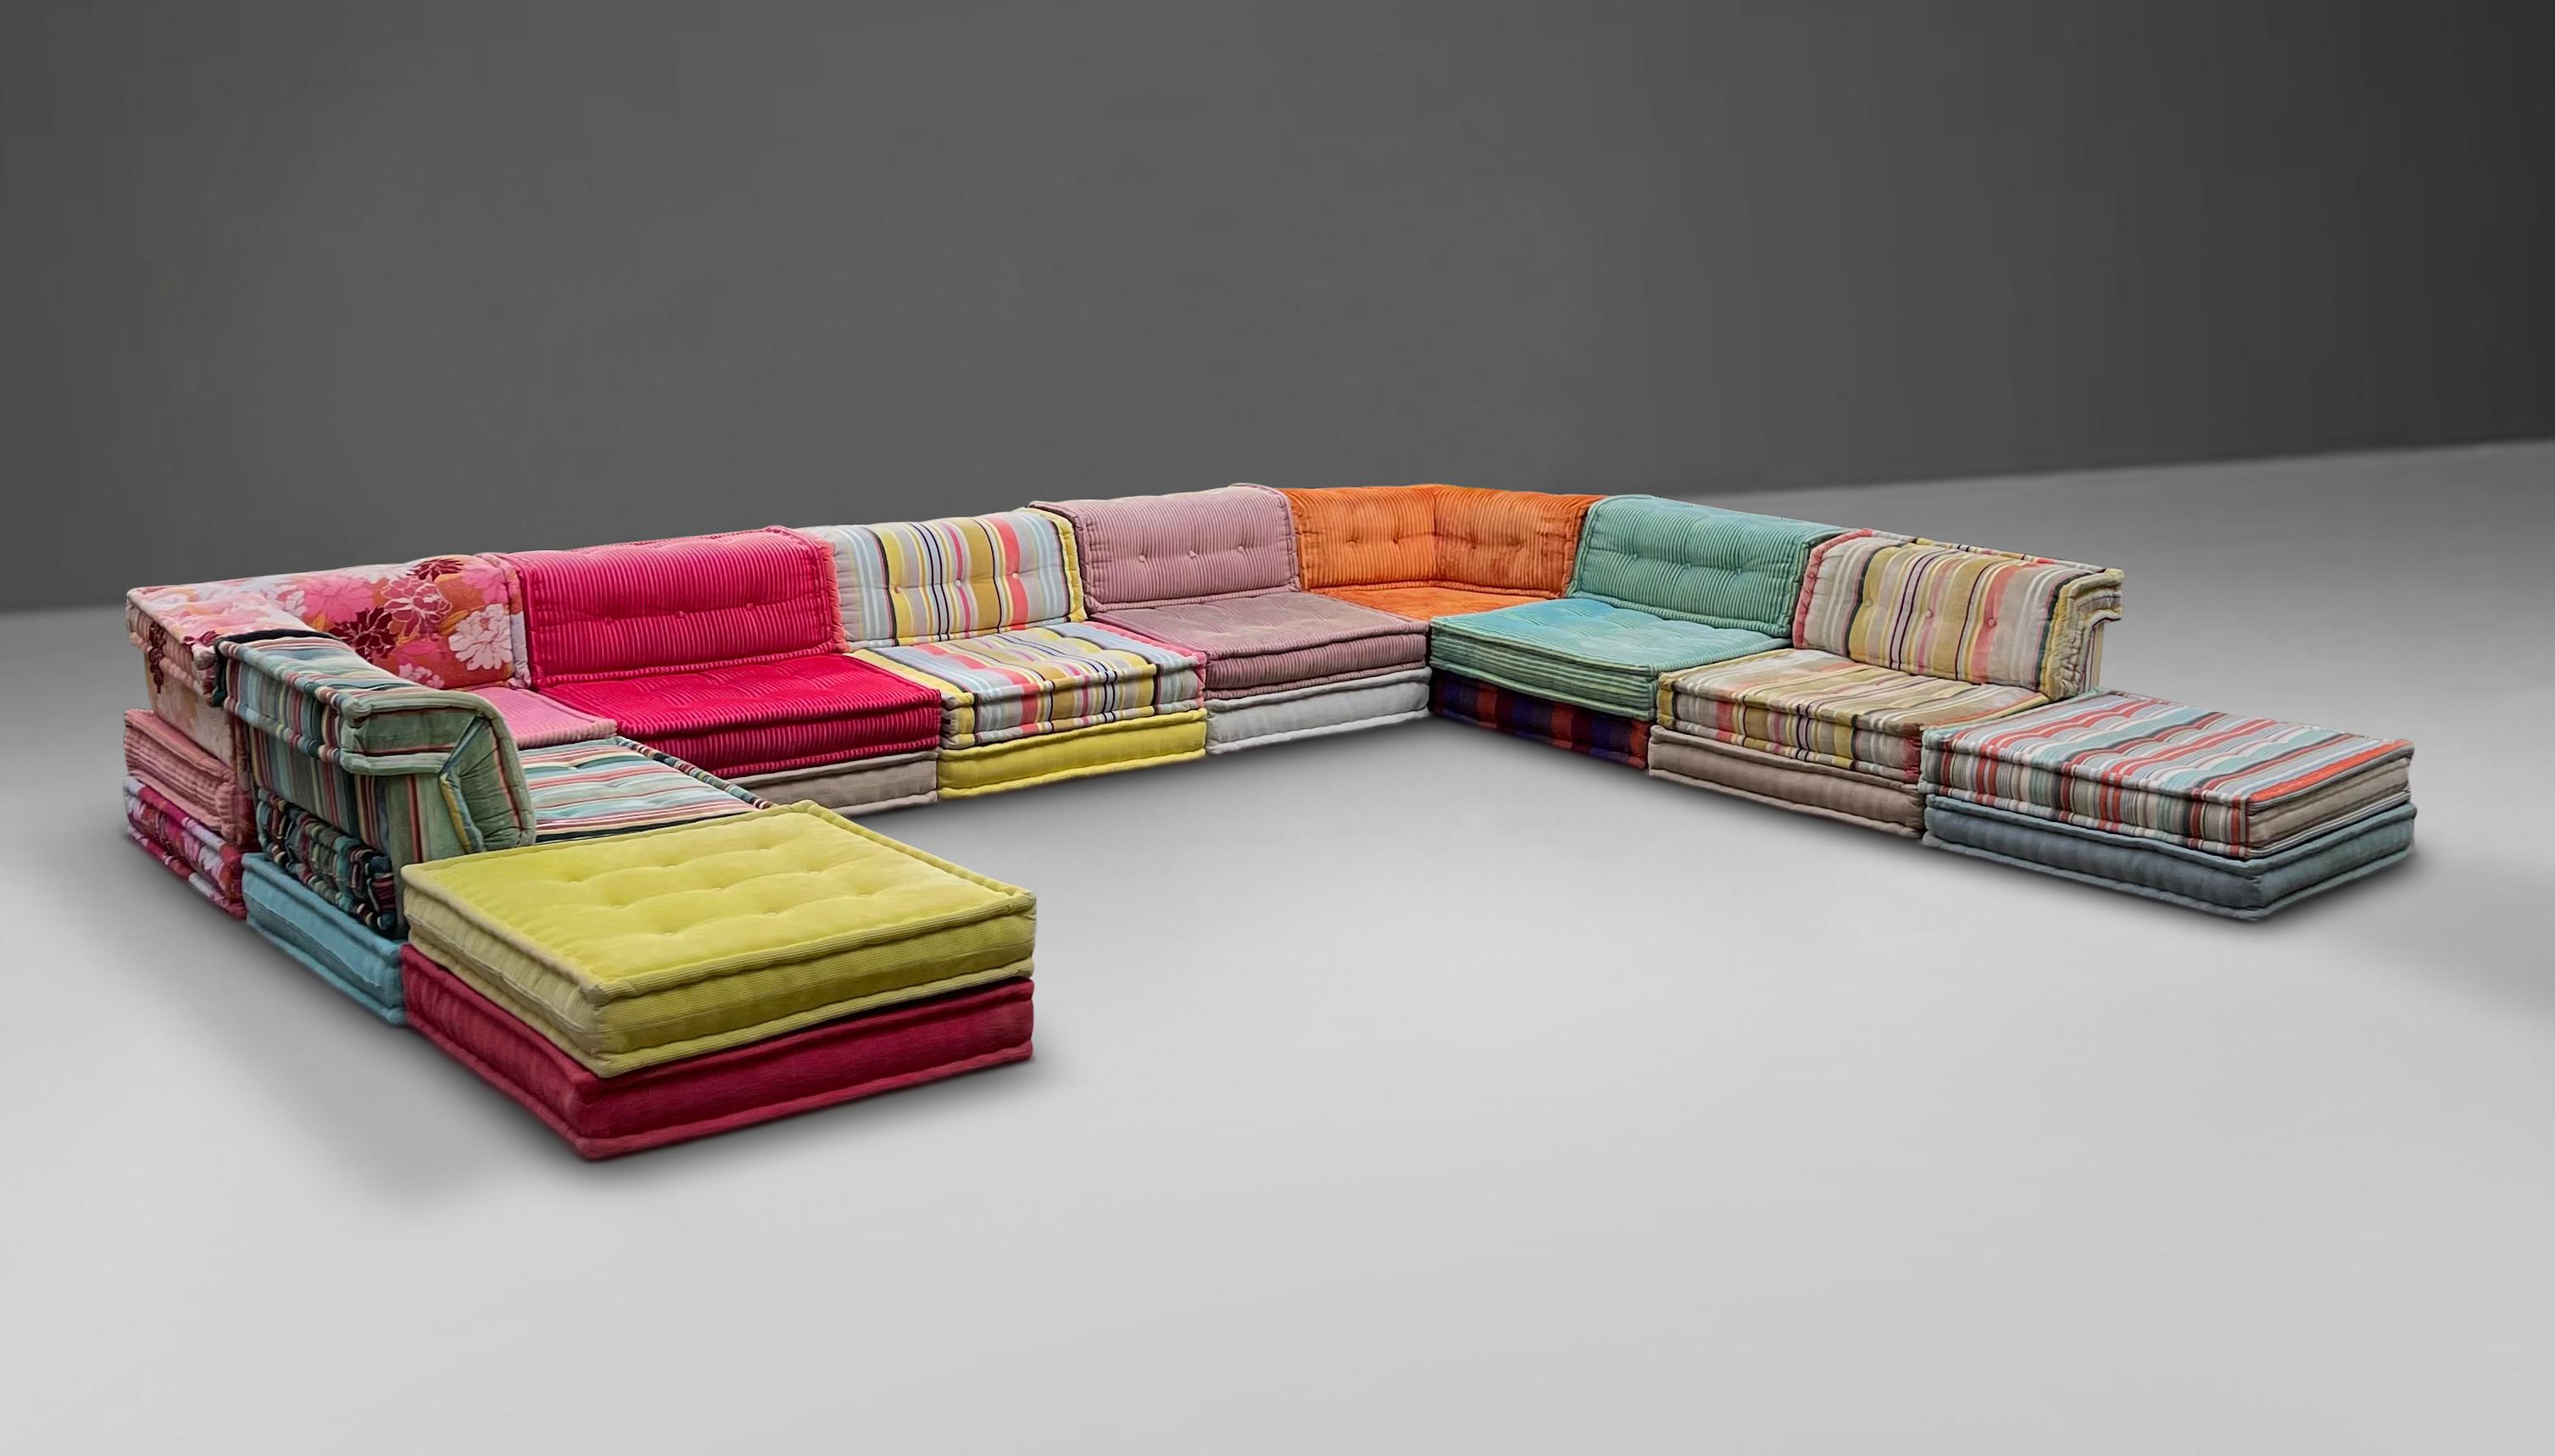 Stunning 'Mah Jong' sofa designed by Hans Hopfer for Roche Bobois. An iconic sofa design made in Italy in a beautiful and vibrant fabric. Includes 20 floor cushions, 6 back rests and 2 corner pieces. Extremely comfortable and roomy. Floor cushions